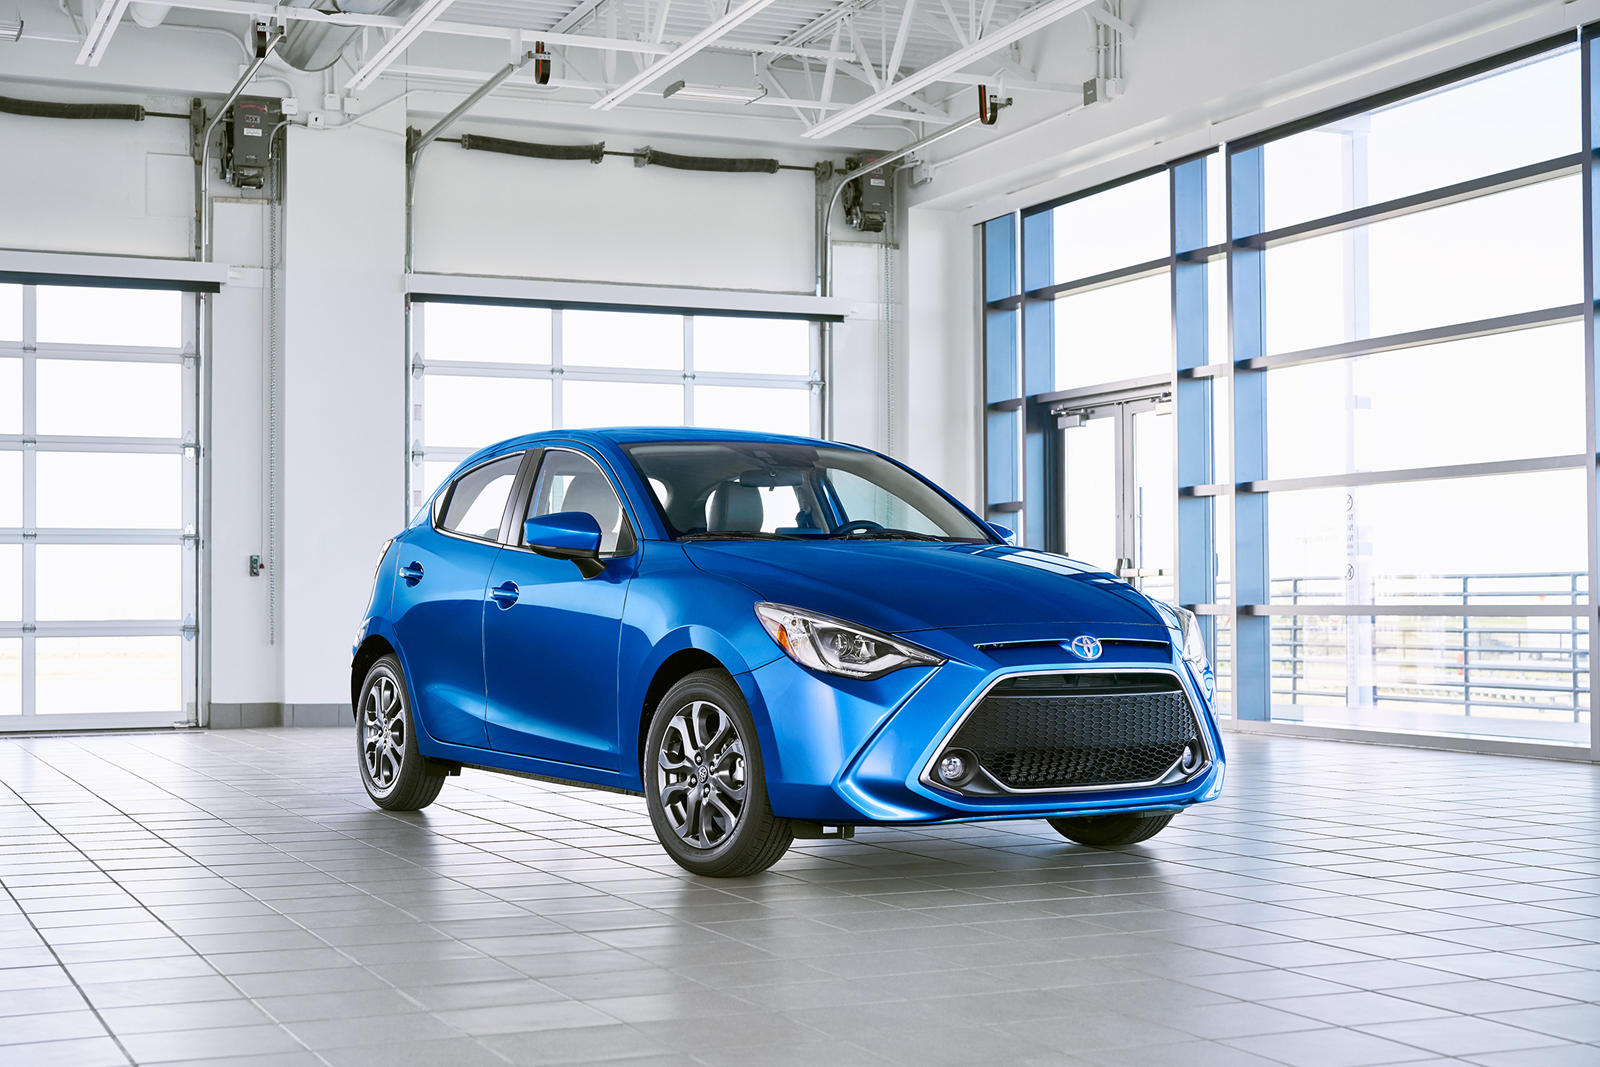 2020 Toyota Yaris Hatchback Front Angle View